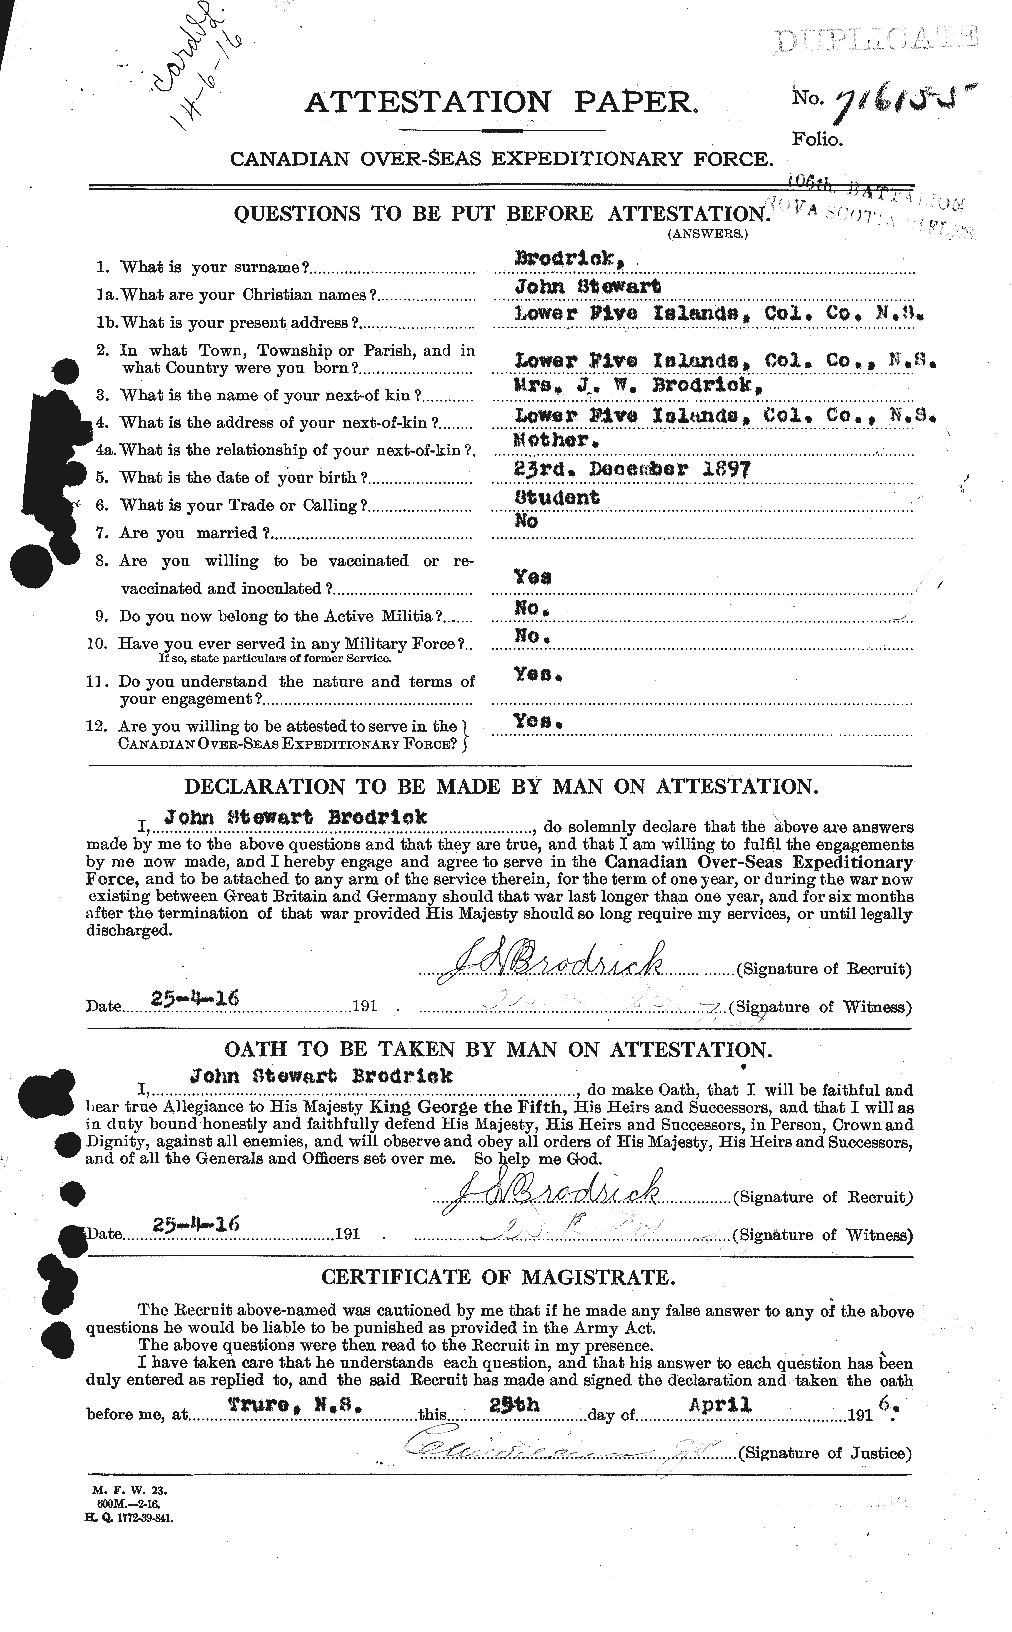 Personnel Records of the First World War - CEF 262035a